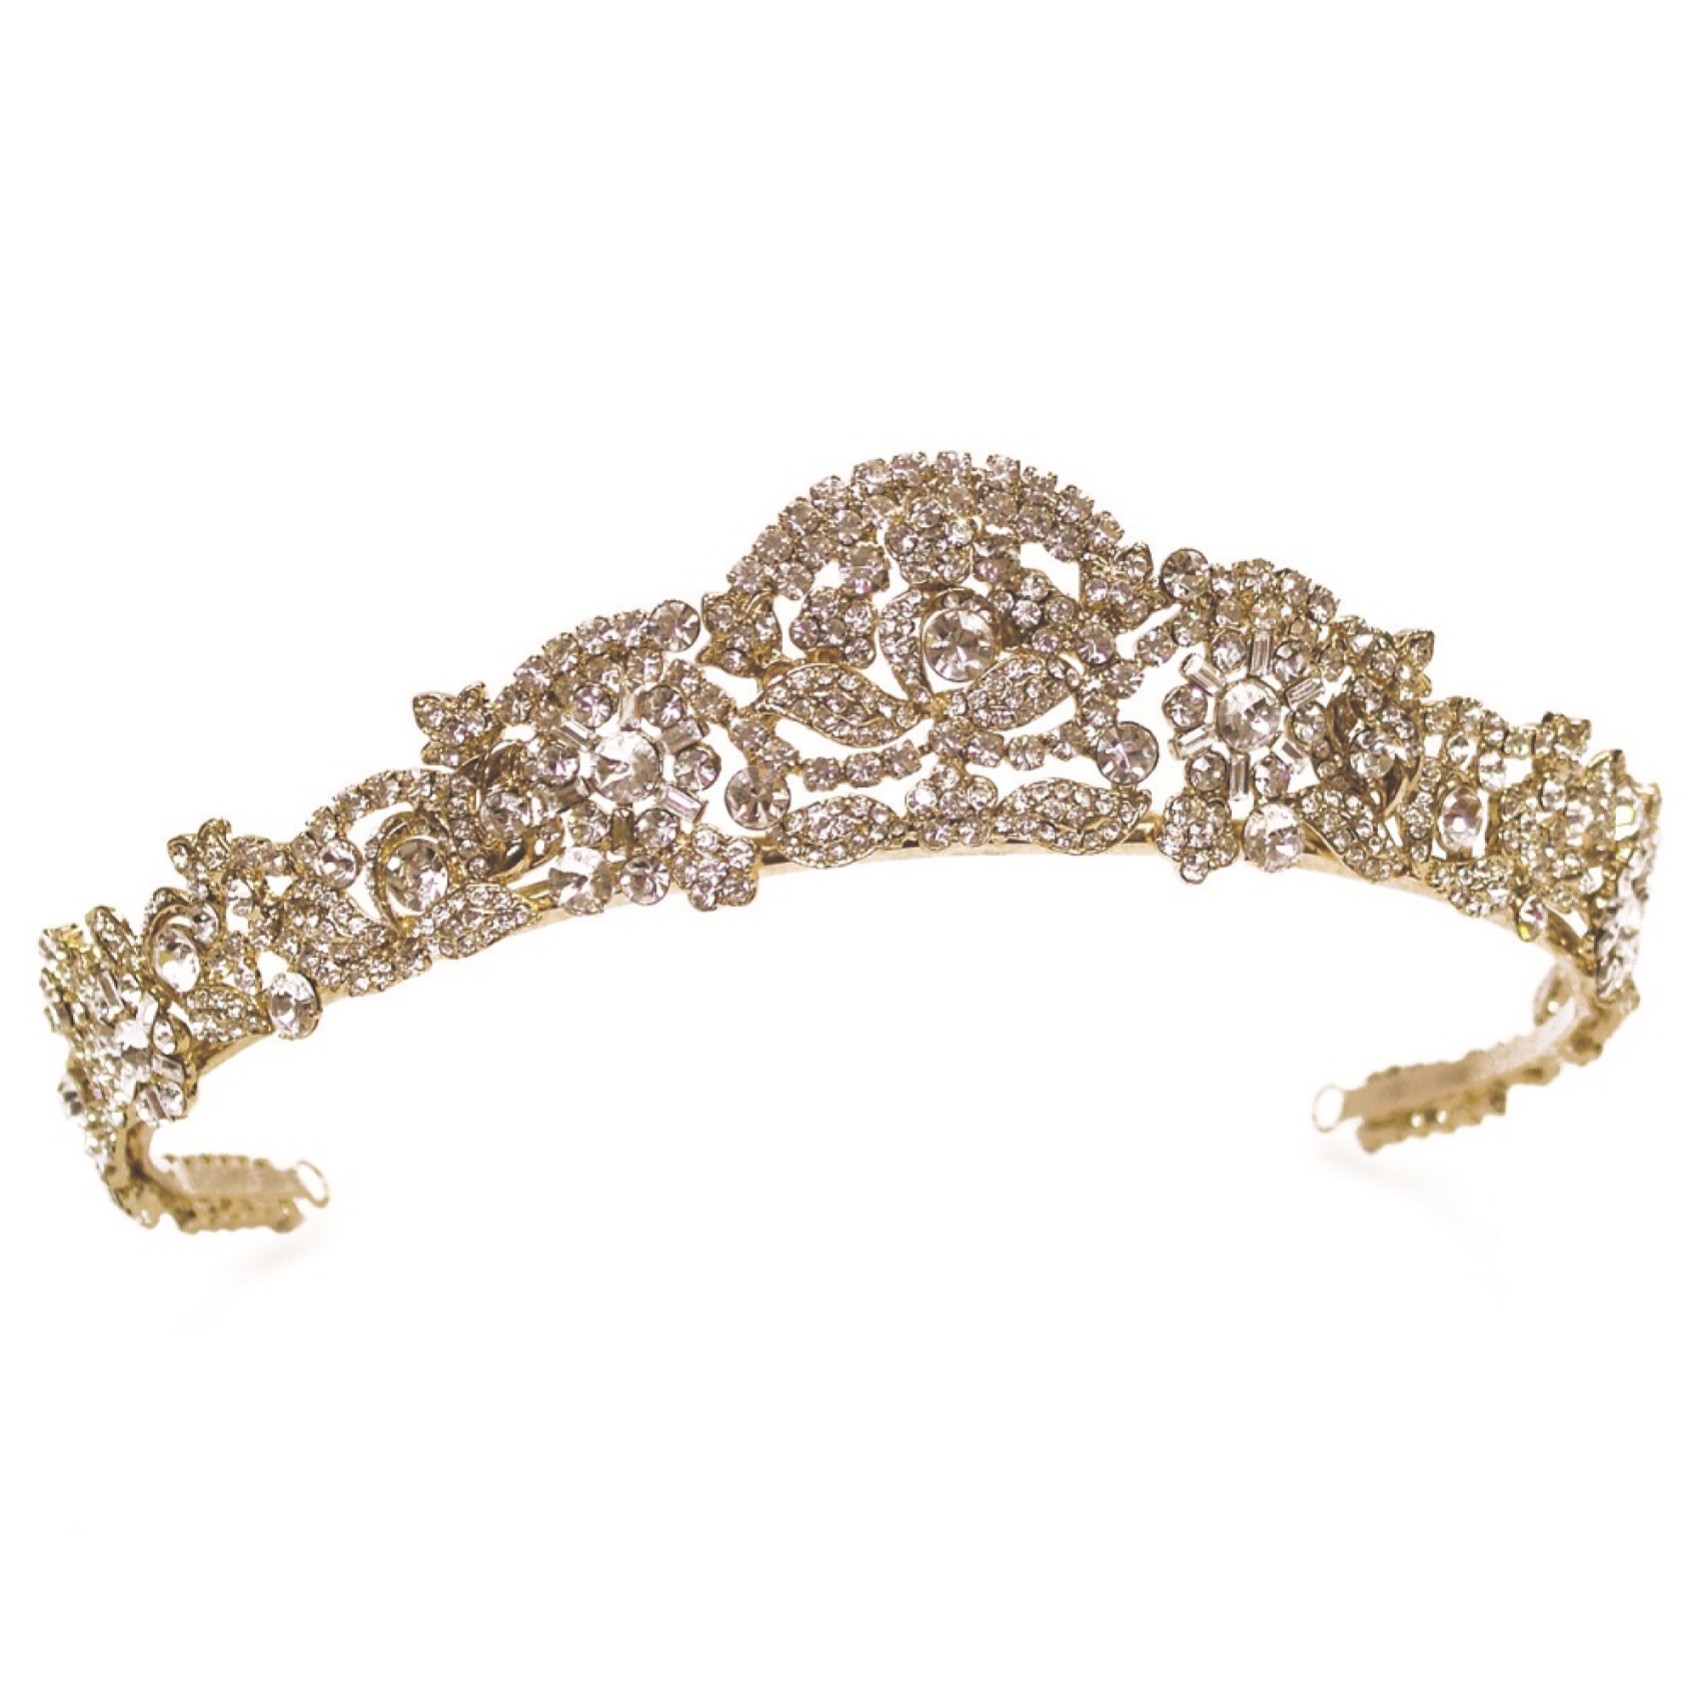 Ivory and Co Marcella Gold Art Deco Crystal Embellished Wedding Tiara